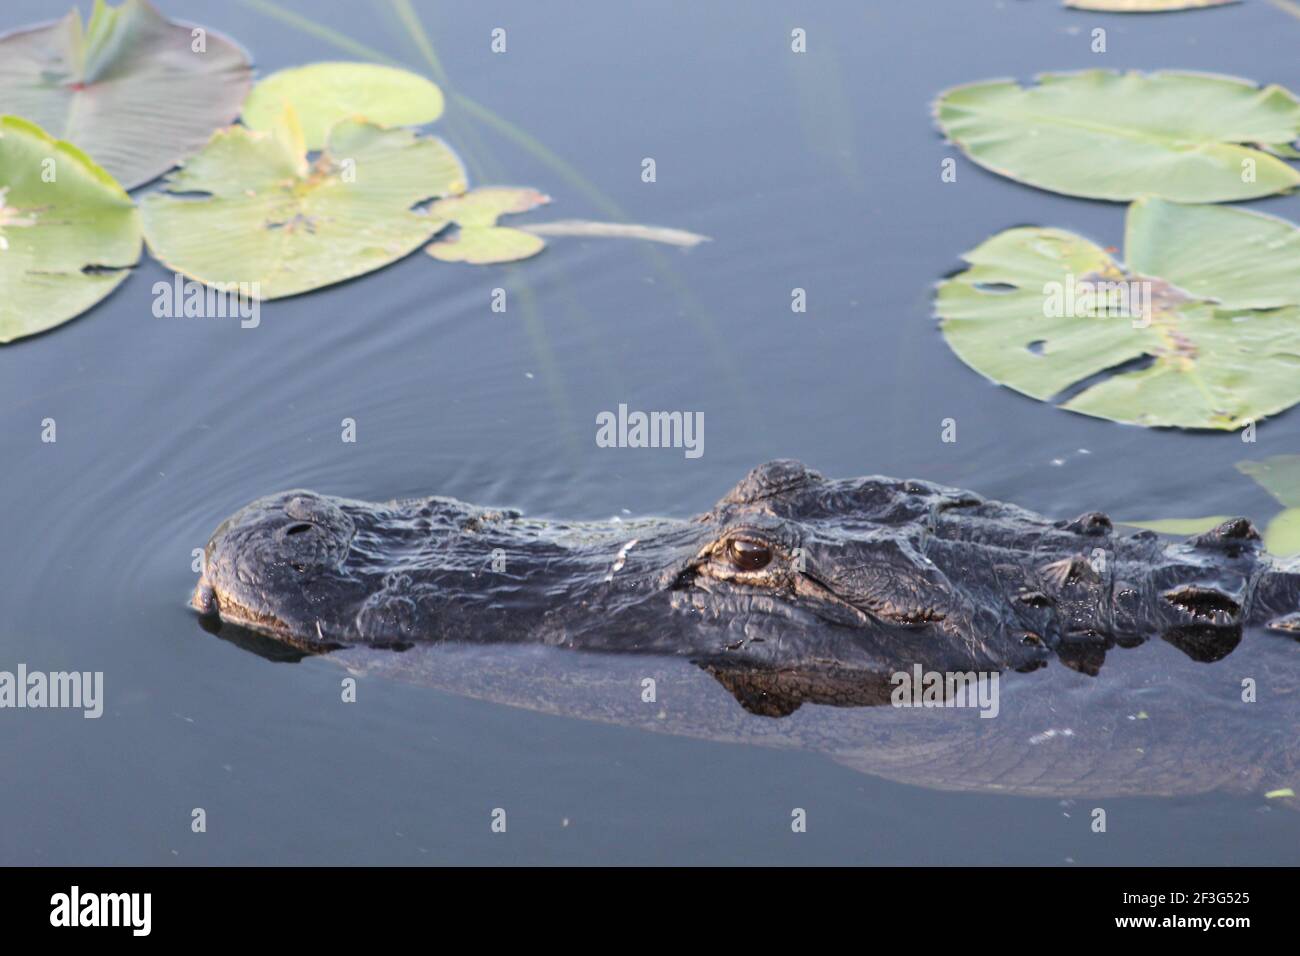 Alligator snout submerged in the water in Everglades National Park. Stock Photo